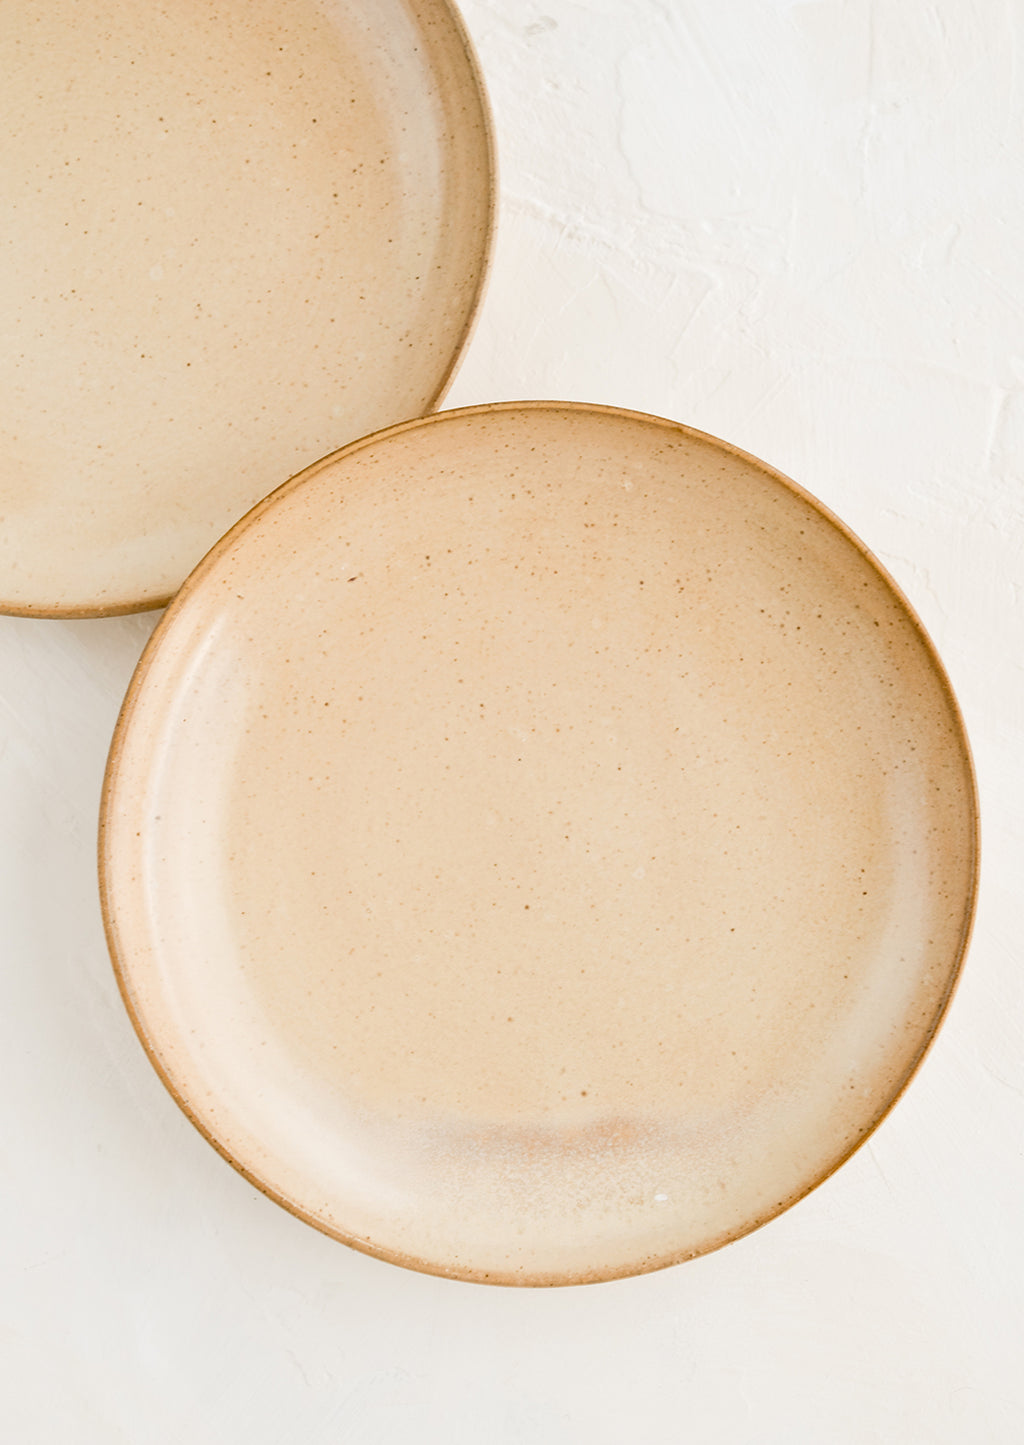 1: Two round side plates in a speckled tan glaze.